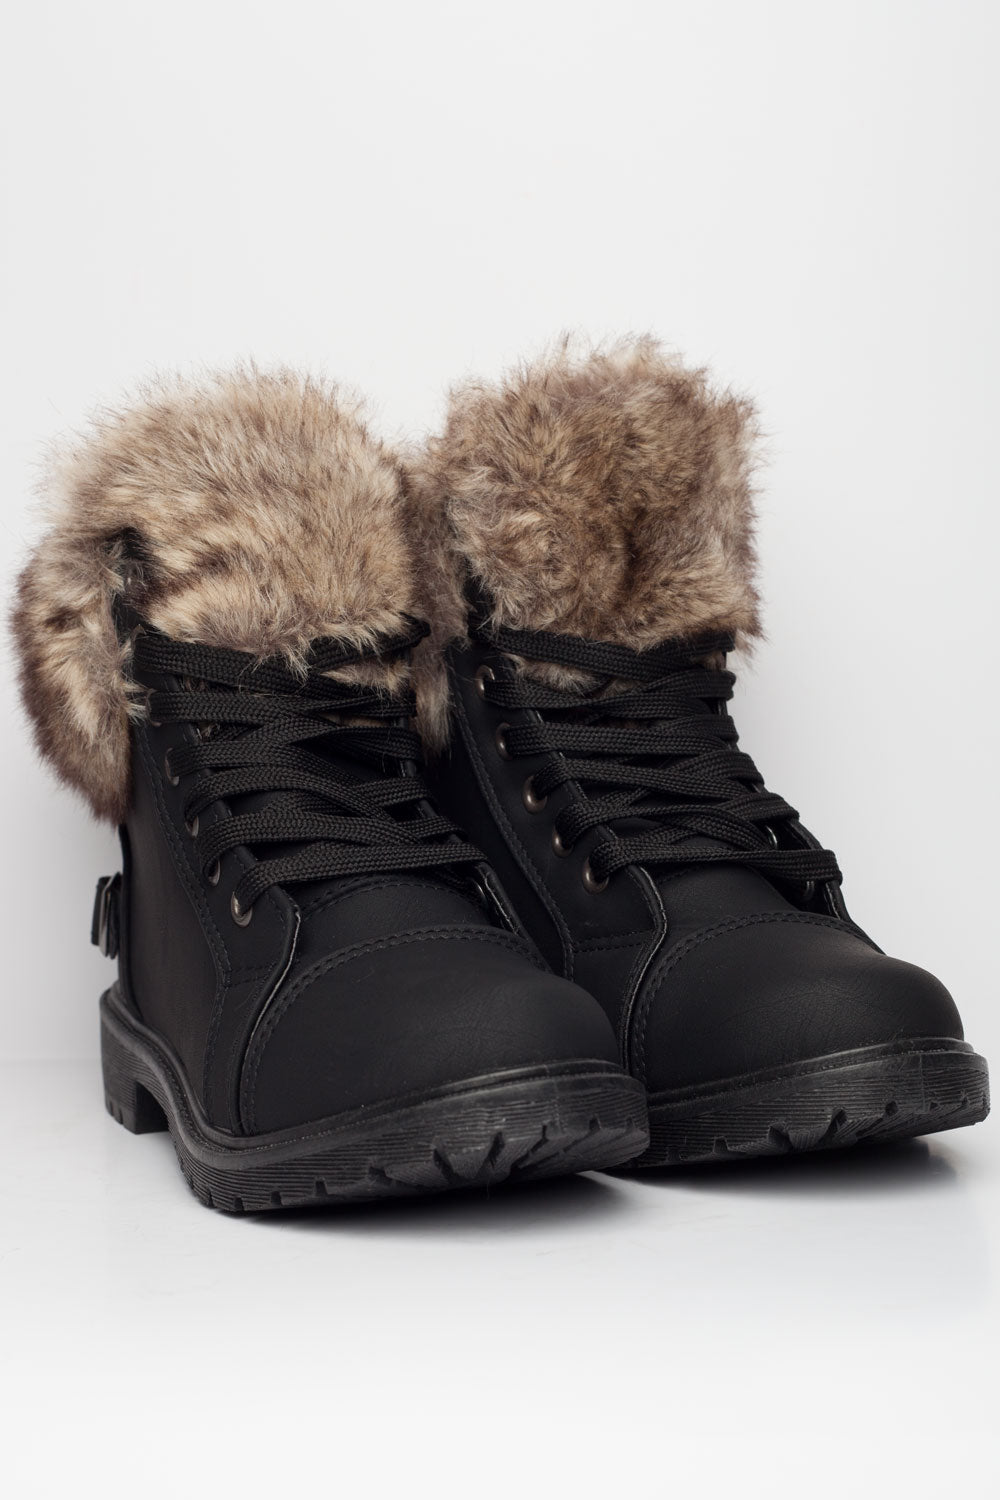 womens fur lined boots